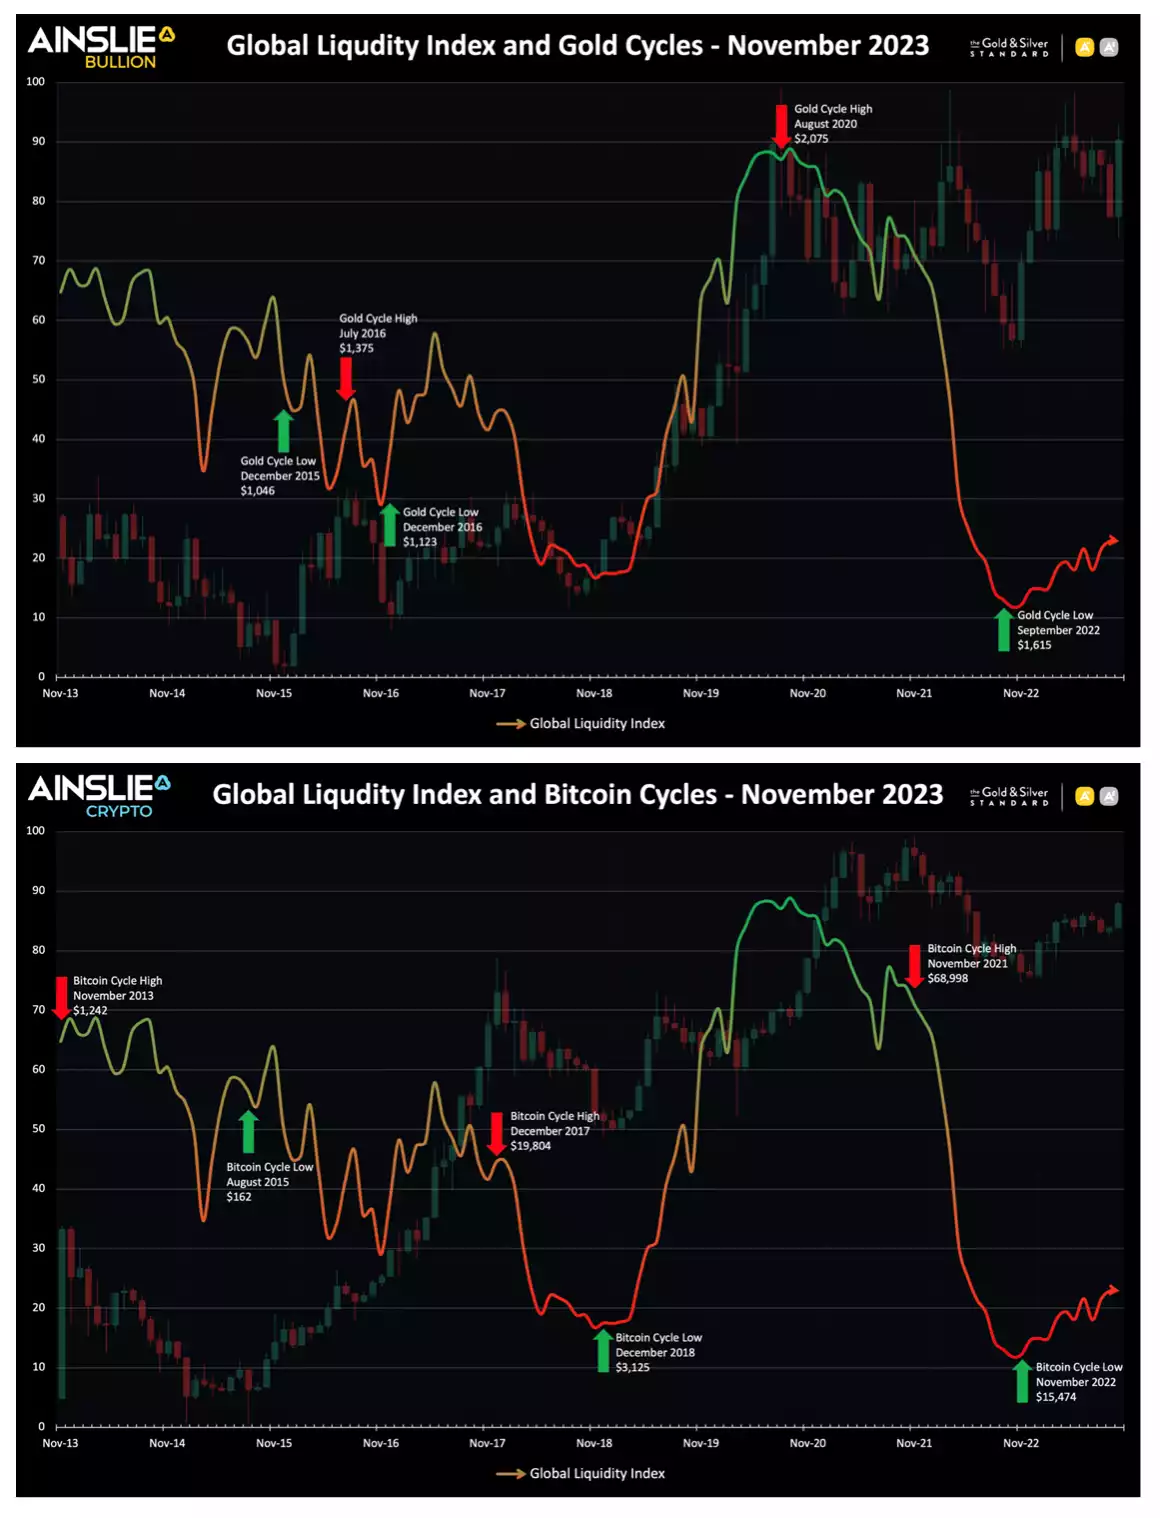 Global Liquidity Index and Gold Cycles - November 2023